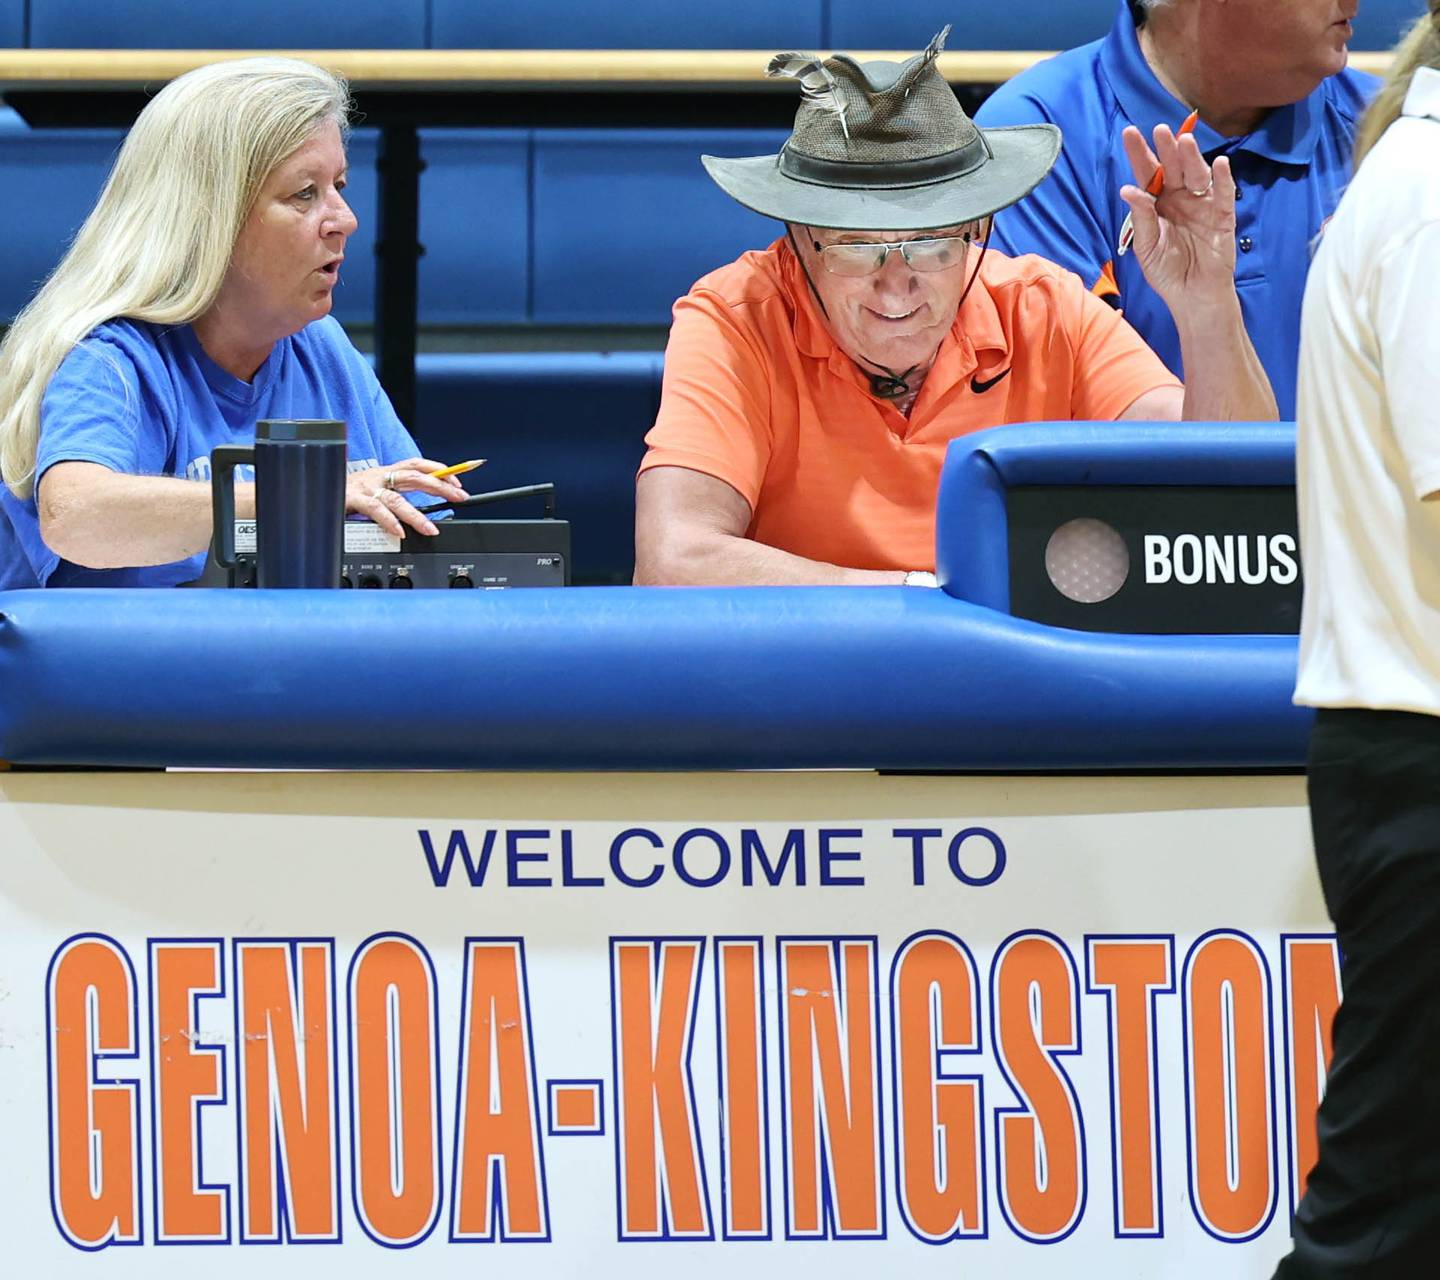 U.S. Navy veteran Jim Kush has a laugh Tuesday, Sept. 5, 2023, at Genoa-Kingston High School while working as the official score keeper for the Genoa-Kingston volleyball team. Kush has also sung the National Anthem at Genoa-Kingston sporting events.